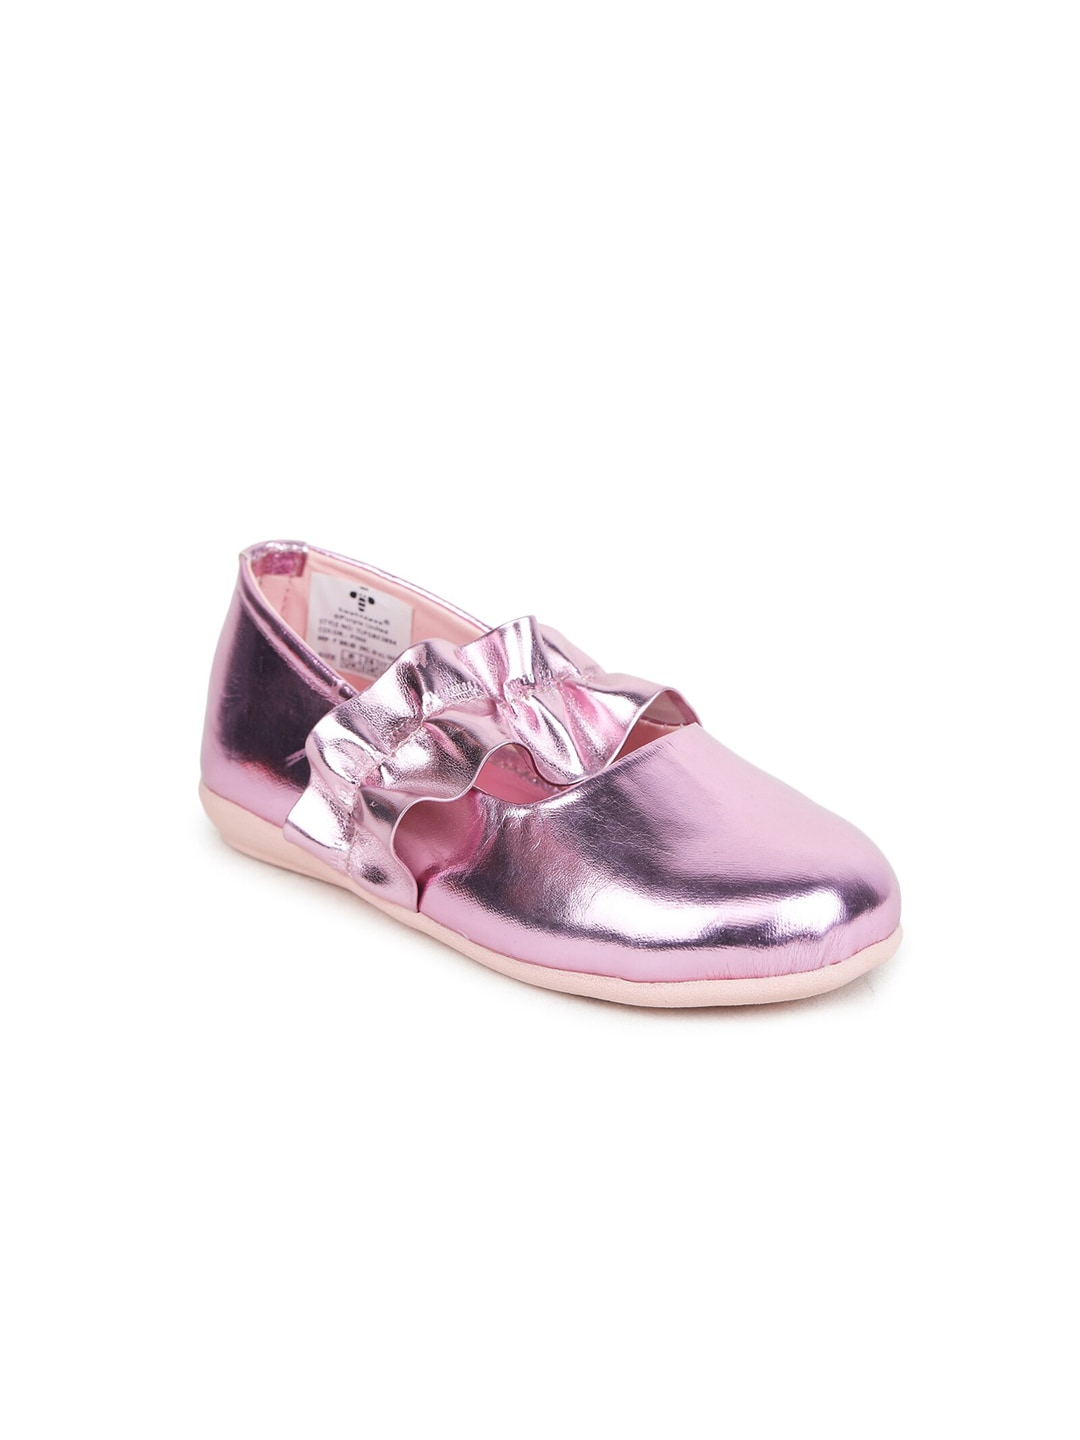 toothless Girls Pink Embellished Ballerinas Flats Price in India